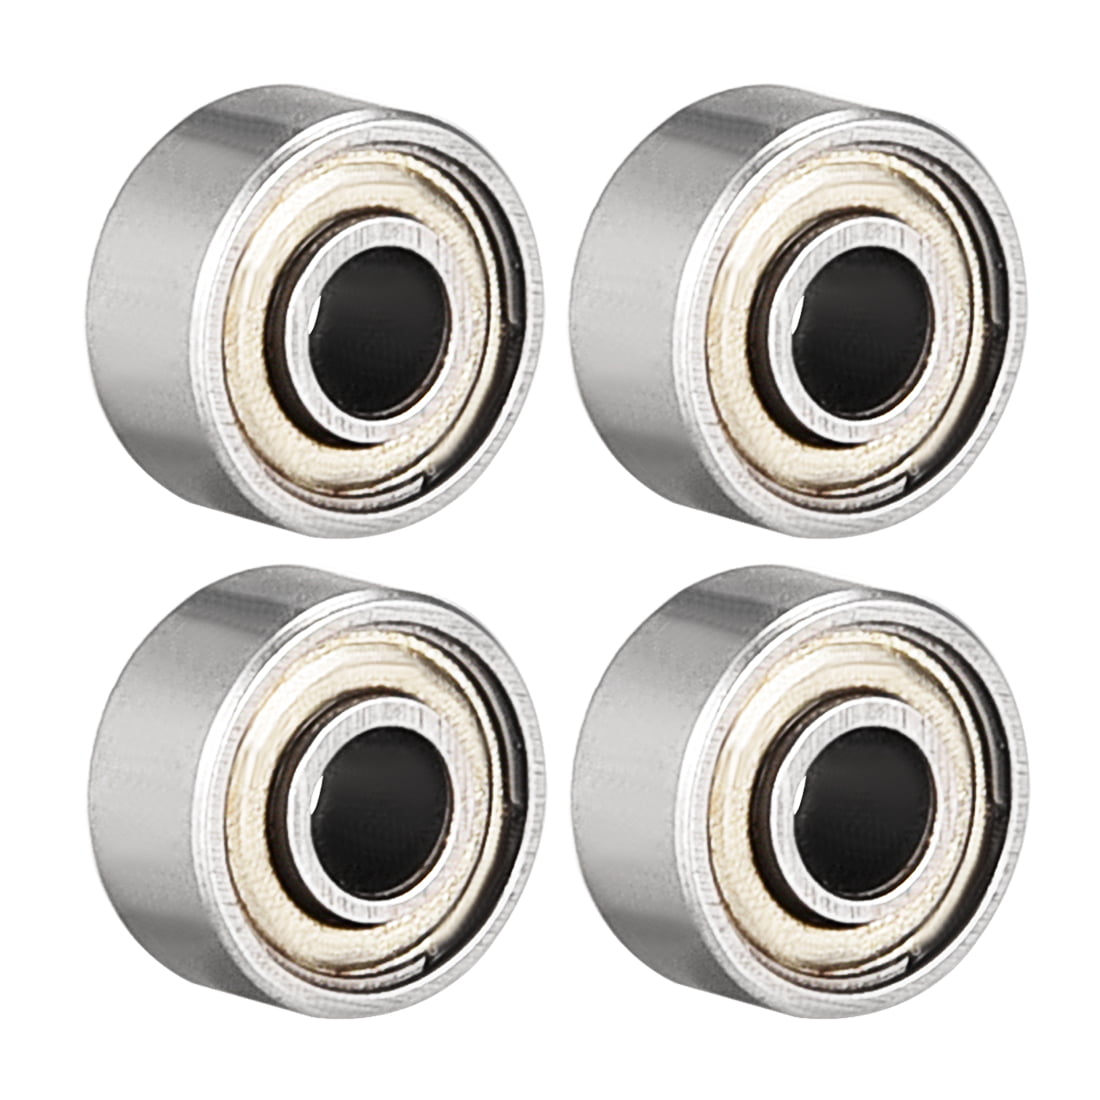 sourcing map 693ZZ Deep Groove Ball Bearing Double Shield 693-2Z 2080093 Pack of 4 3mm x 8mm x 4mm Carbon Steel Bearings 